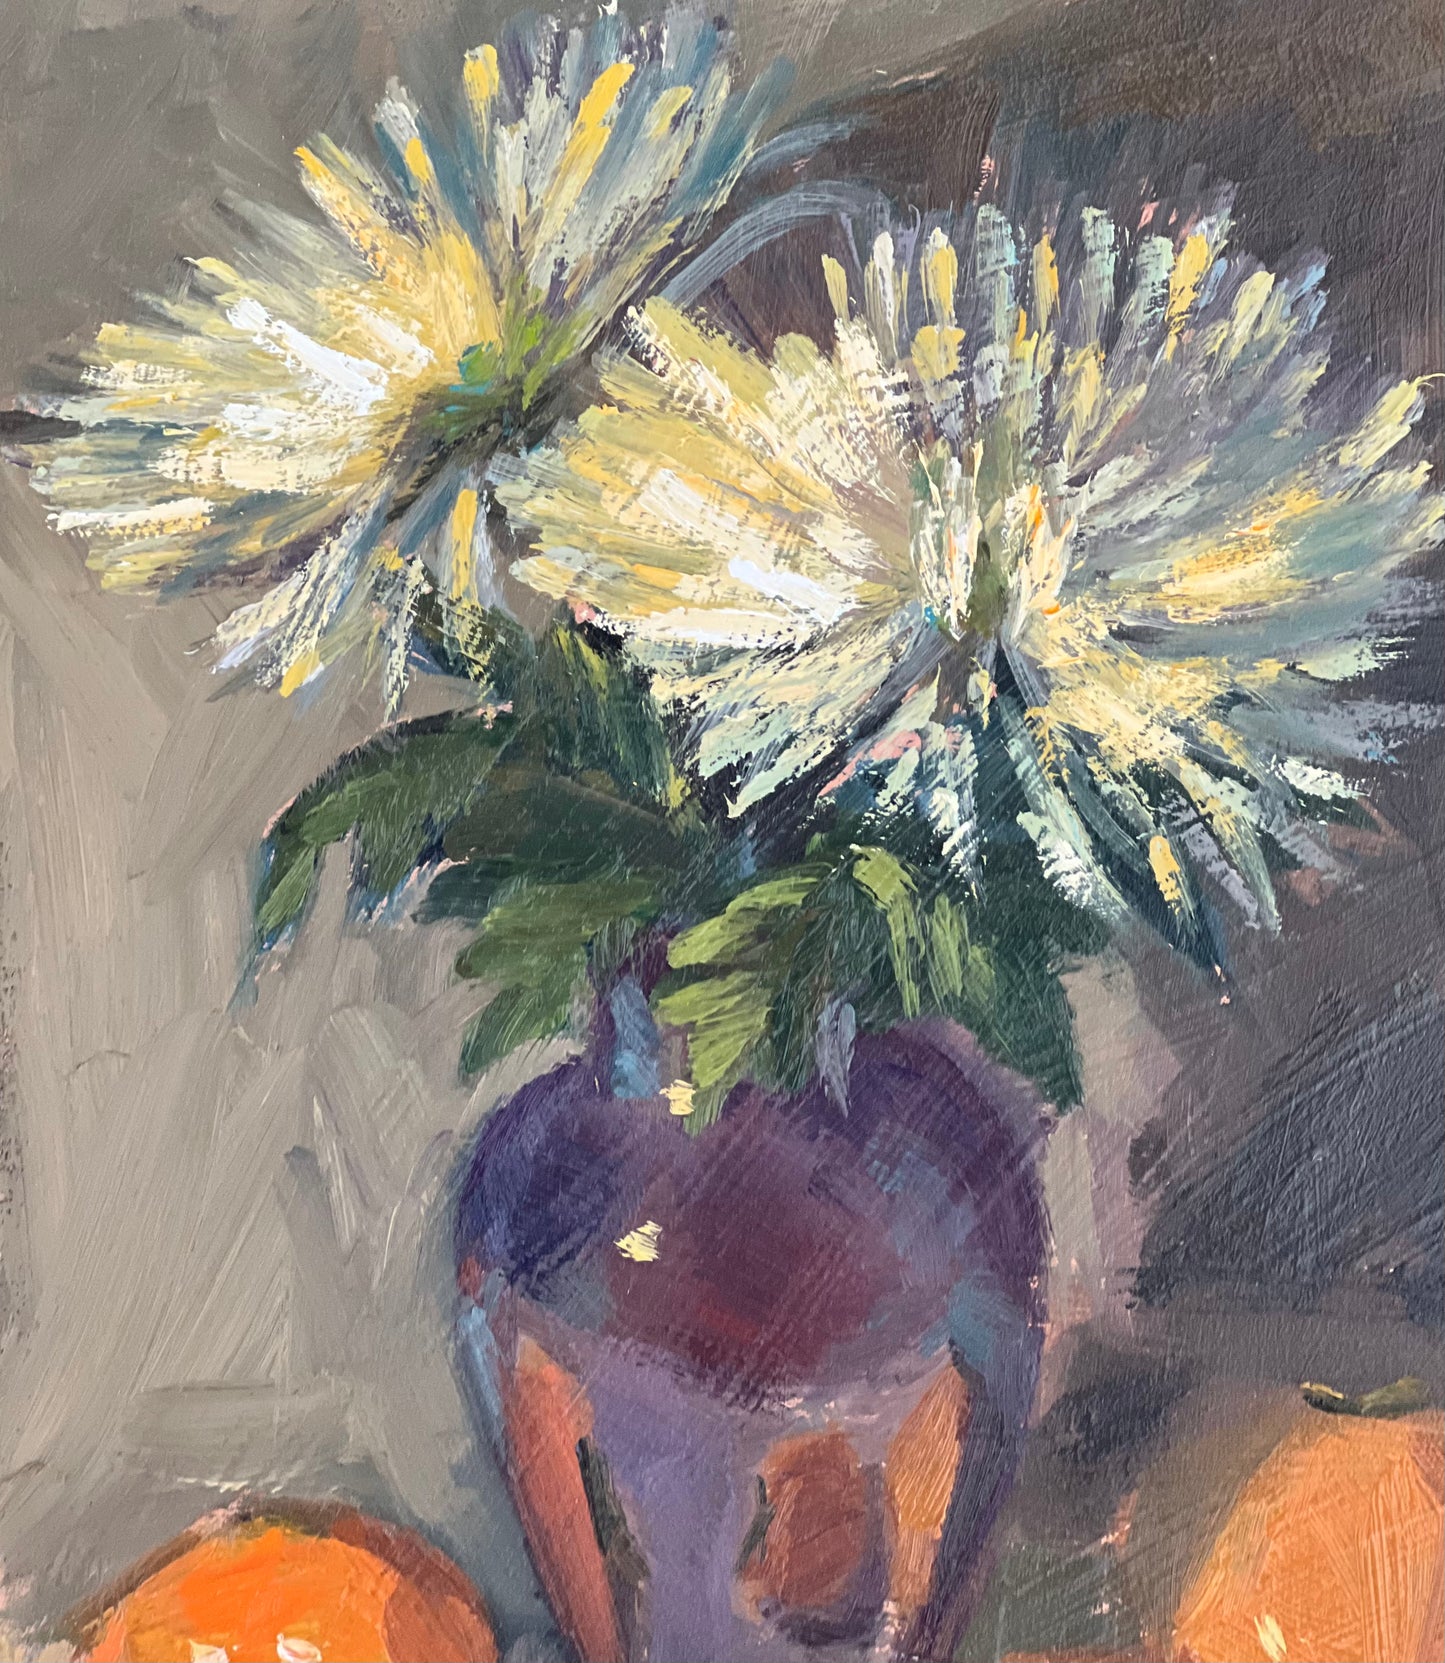 Persimmons and Mums in a vase - Original Oil Painting